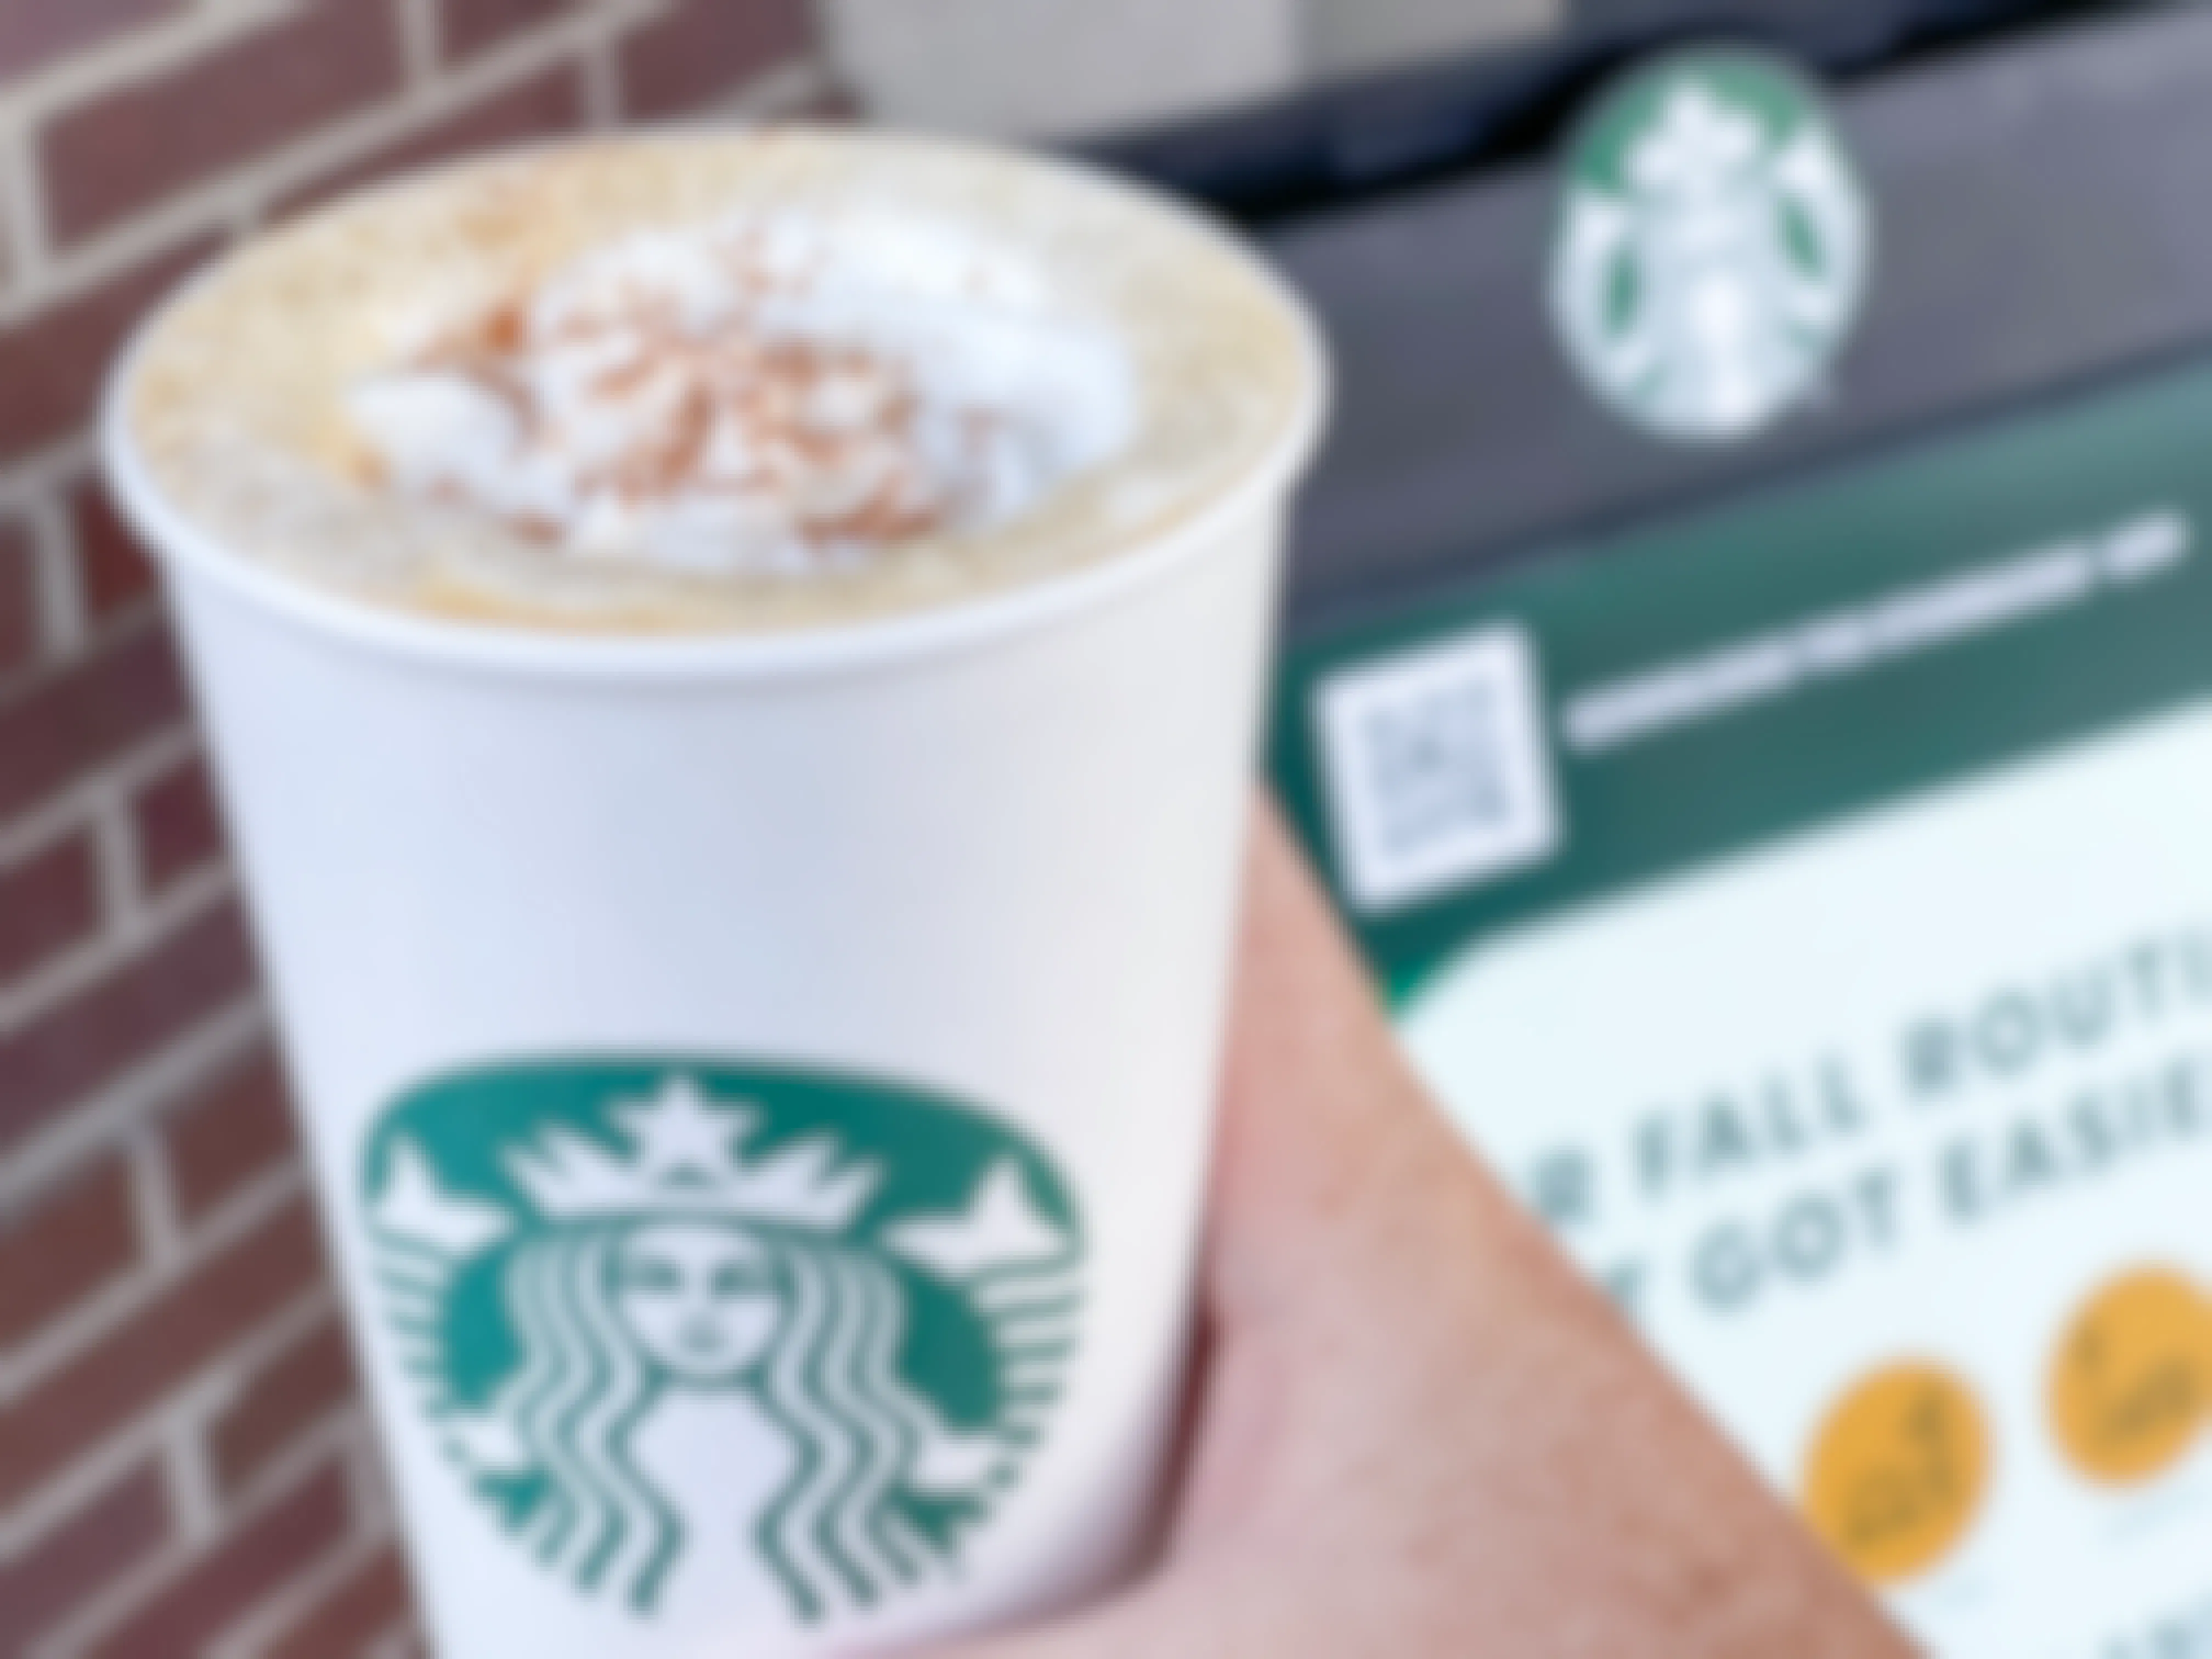 Who Has the Cheapest Priced Pumpkin Spice Latte This Year?